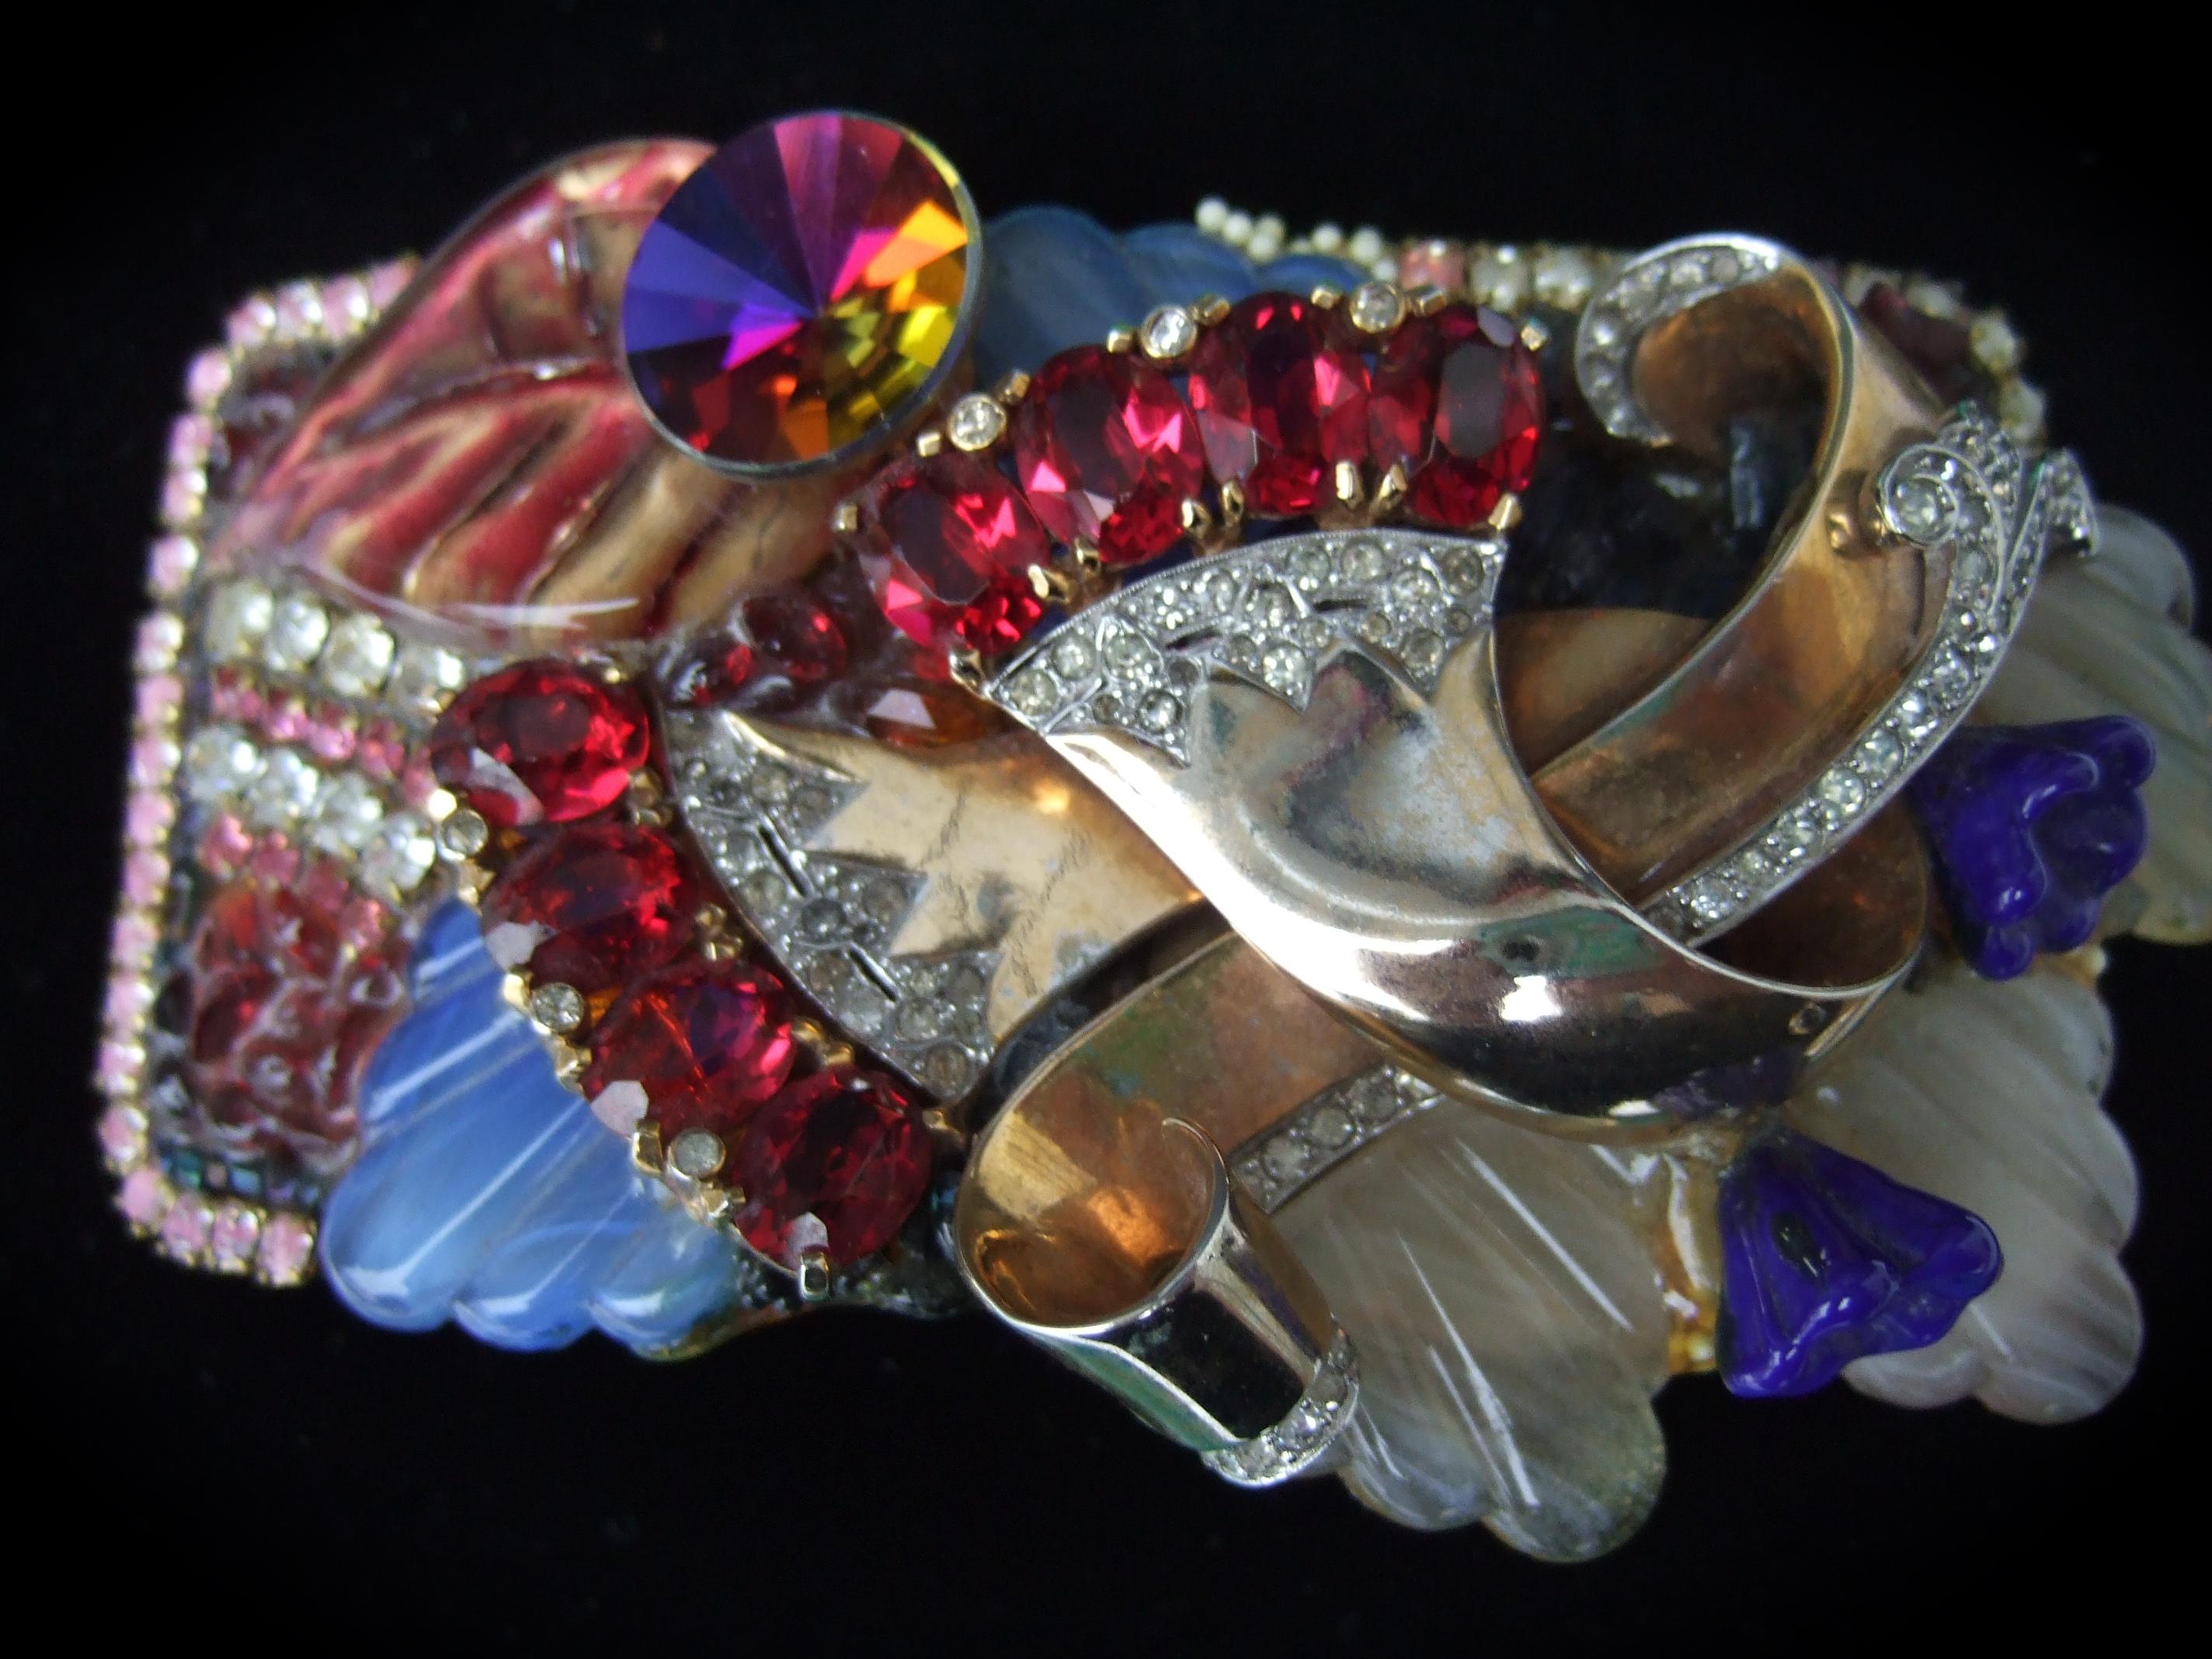 Wendy Gill Crystal Encrusted Repurposed Artisan Belt Buckle c 1980s In Good Condition For Sale In University City, MO